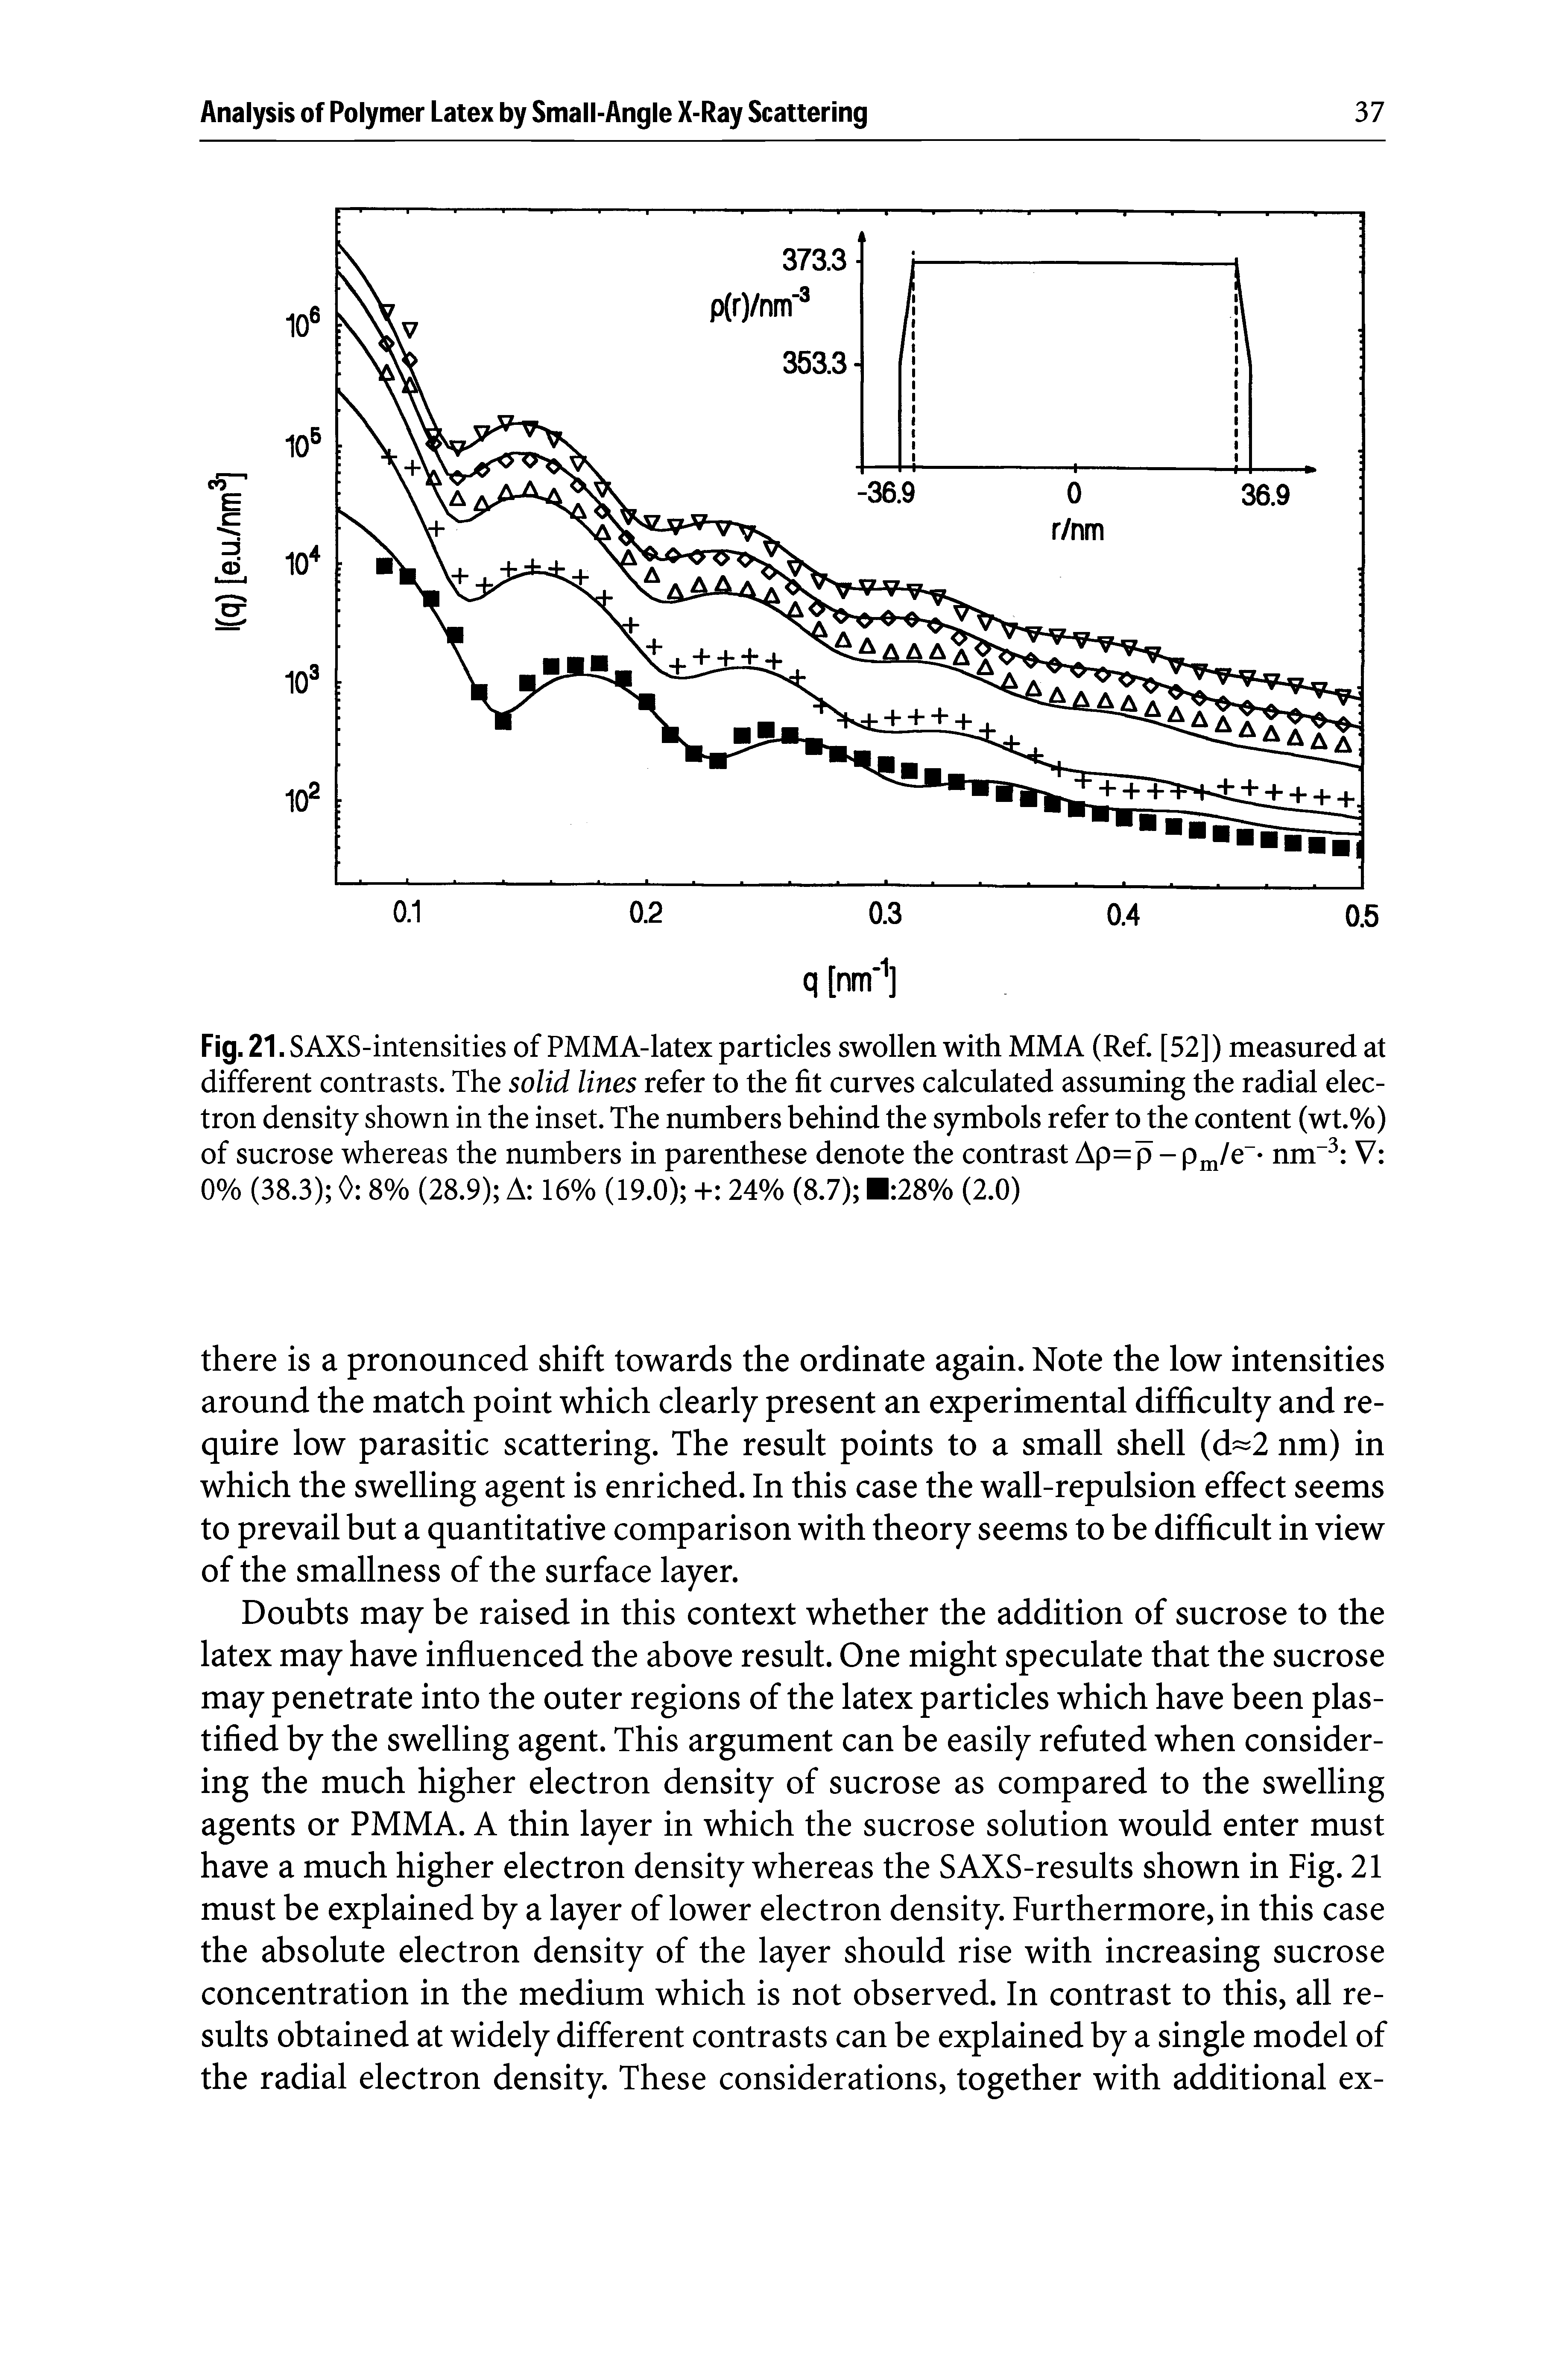 Fig. 21. SAXS-intensities of PMMA-latex particles swollen with MMA (Ref. [52]) measured at different contrasts. The solid lines refer to the fit curves calculated assuming the radial electron density shown in the inset. The numbers behind the symbols refer to the content (wt.%) of sucrose whereas the numbers in parenthese denote the contrast Ap=p-p /e"- nm" V 0% (38.3) 0 8% (28.9) A 16% (19.0) + 24% (8.7) B 28% (2.0)...